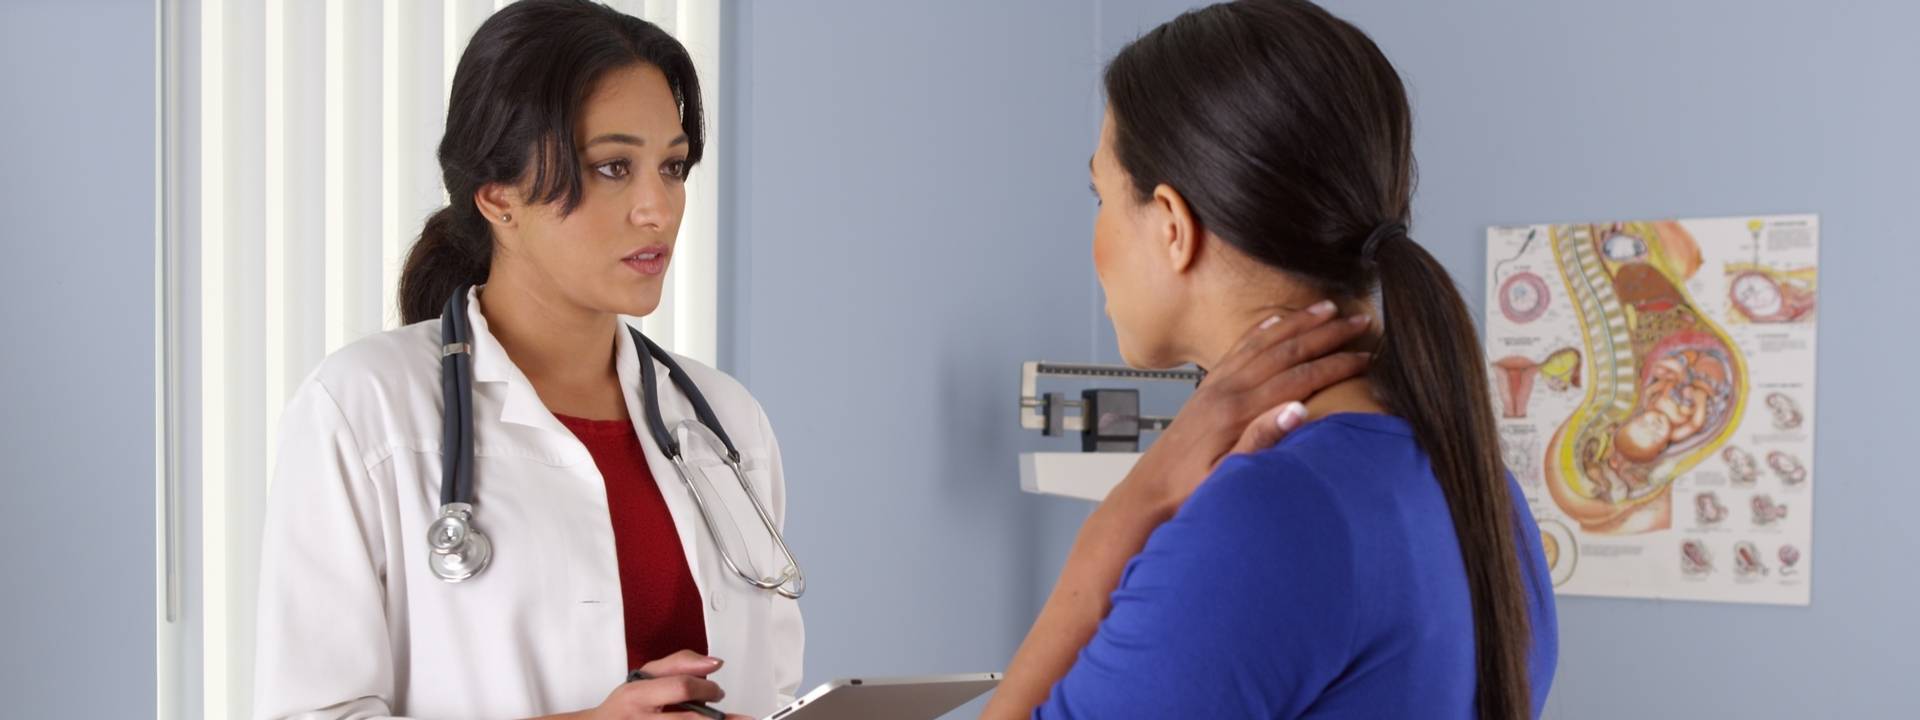 How Soon Should I See a Doctor? 